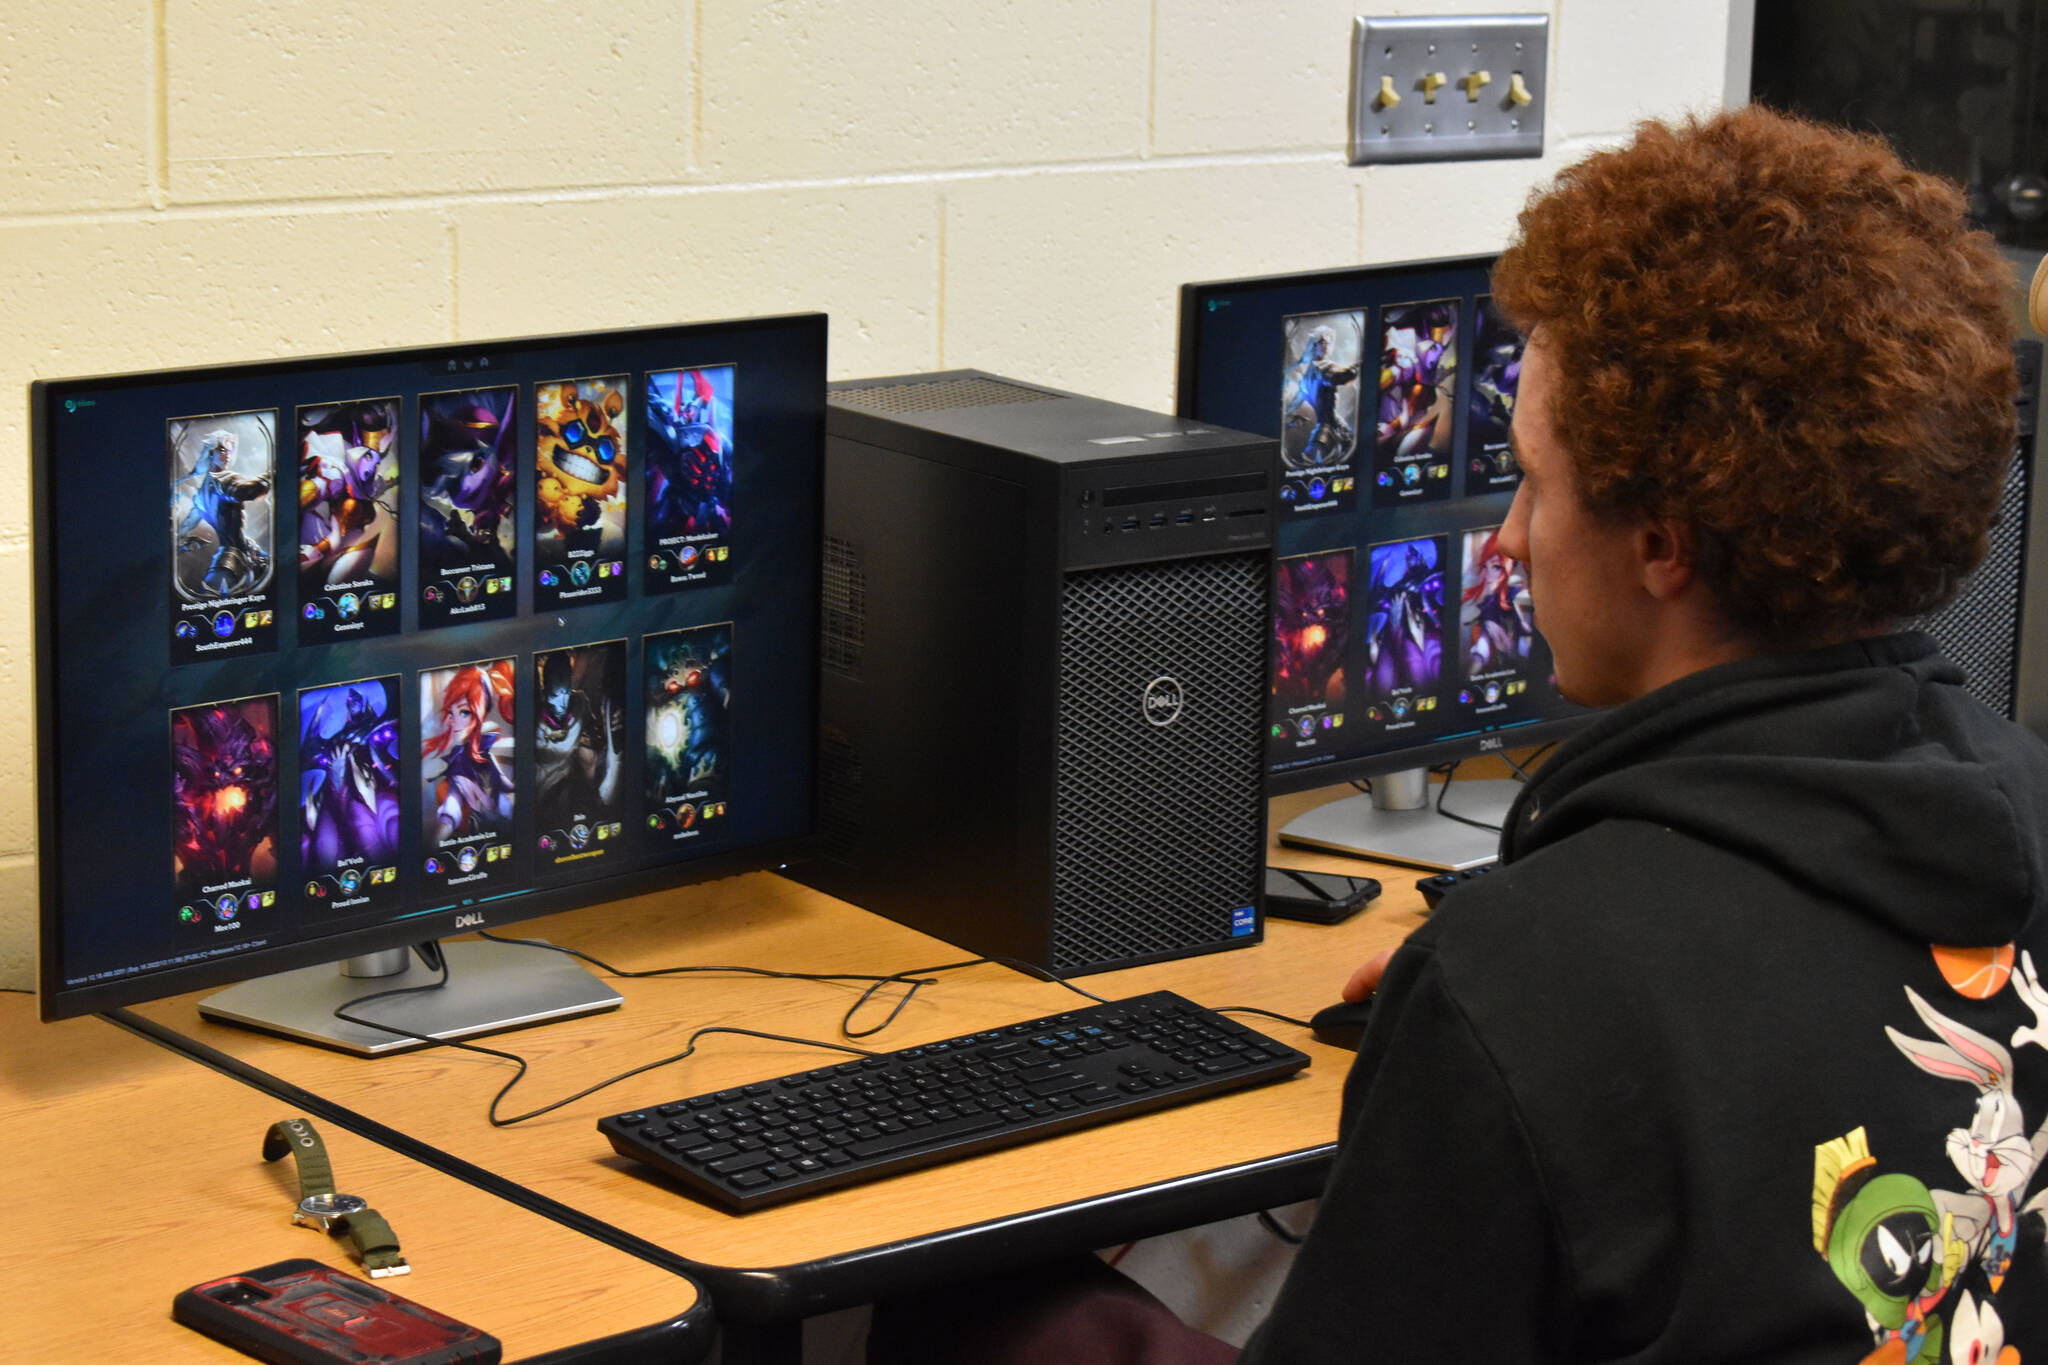 Kenai League of Legends team captain Silas Thibodeau waits for the second game to start during a match on Tuesday, Sept. 27, 2022, at Kenai Central High School in Kenai, Alaska. (Jake Dye/Peninsula Clarion)